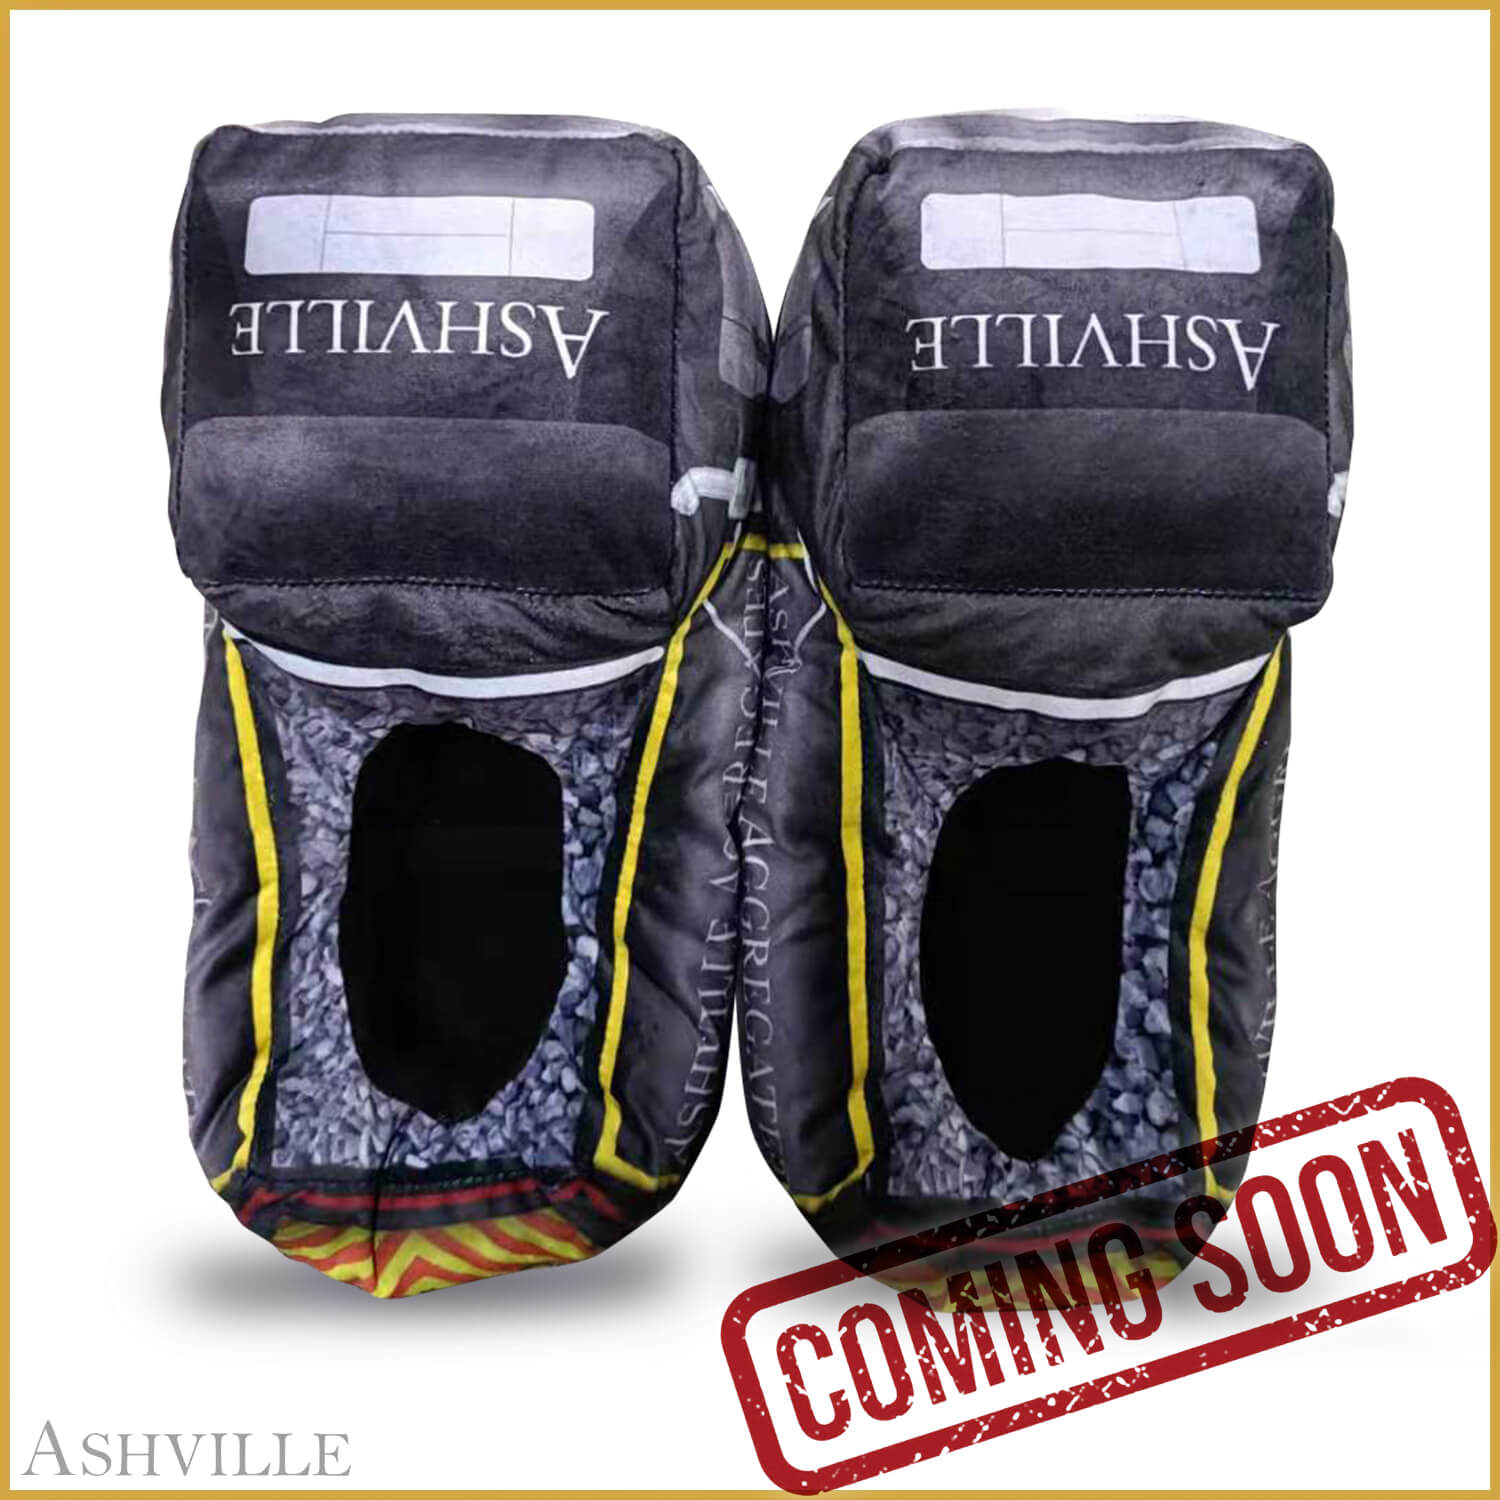 Ashville Tipper Slippers - COMING SOON